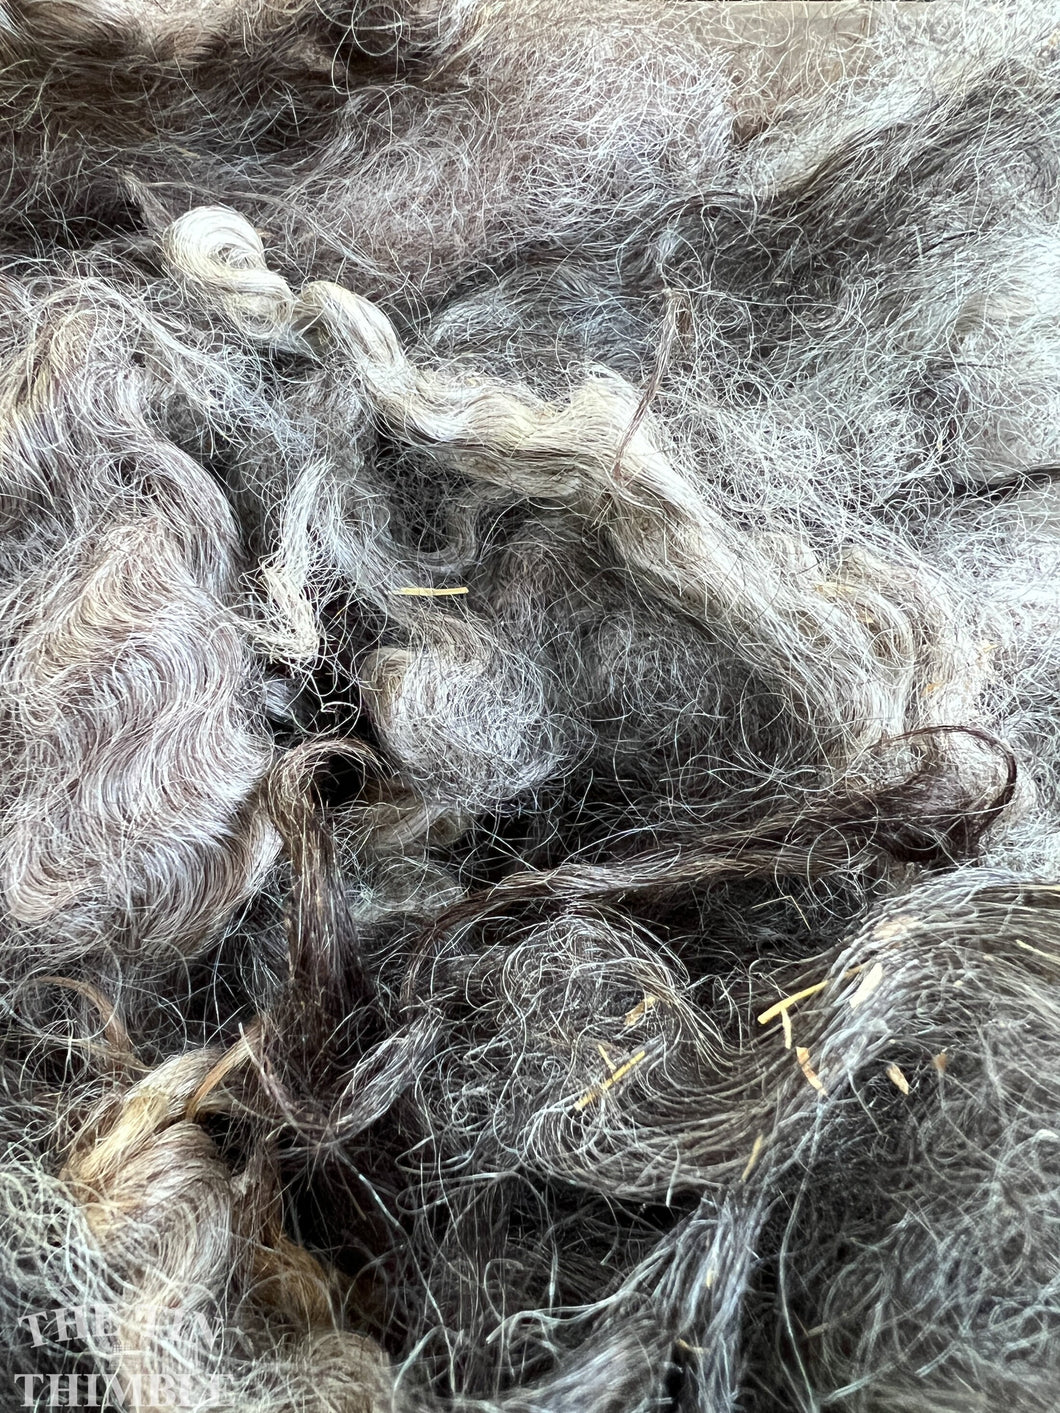 Natural Colored Cotwsold Locks for Felting, Weaving, Spinning and Doll Making - 1 Oz - Curly Fiber for Fibre Art and Doll Hair